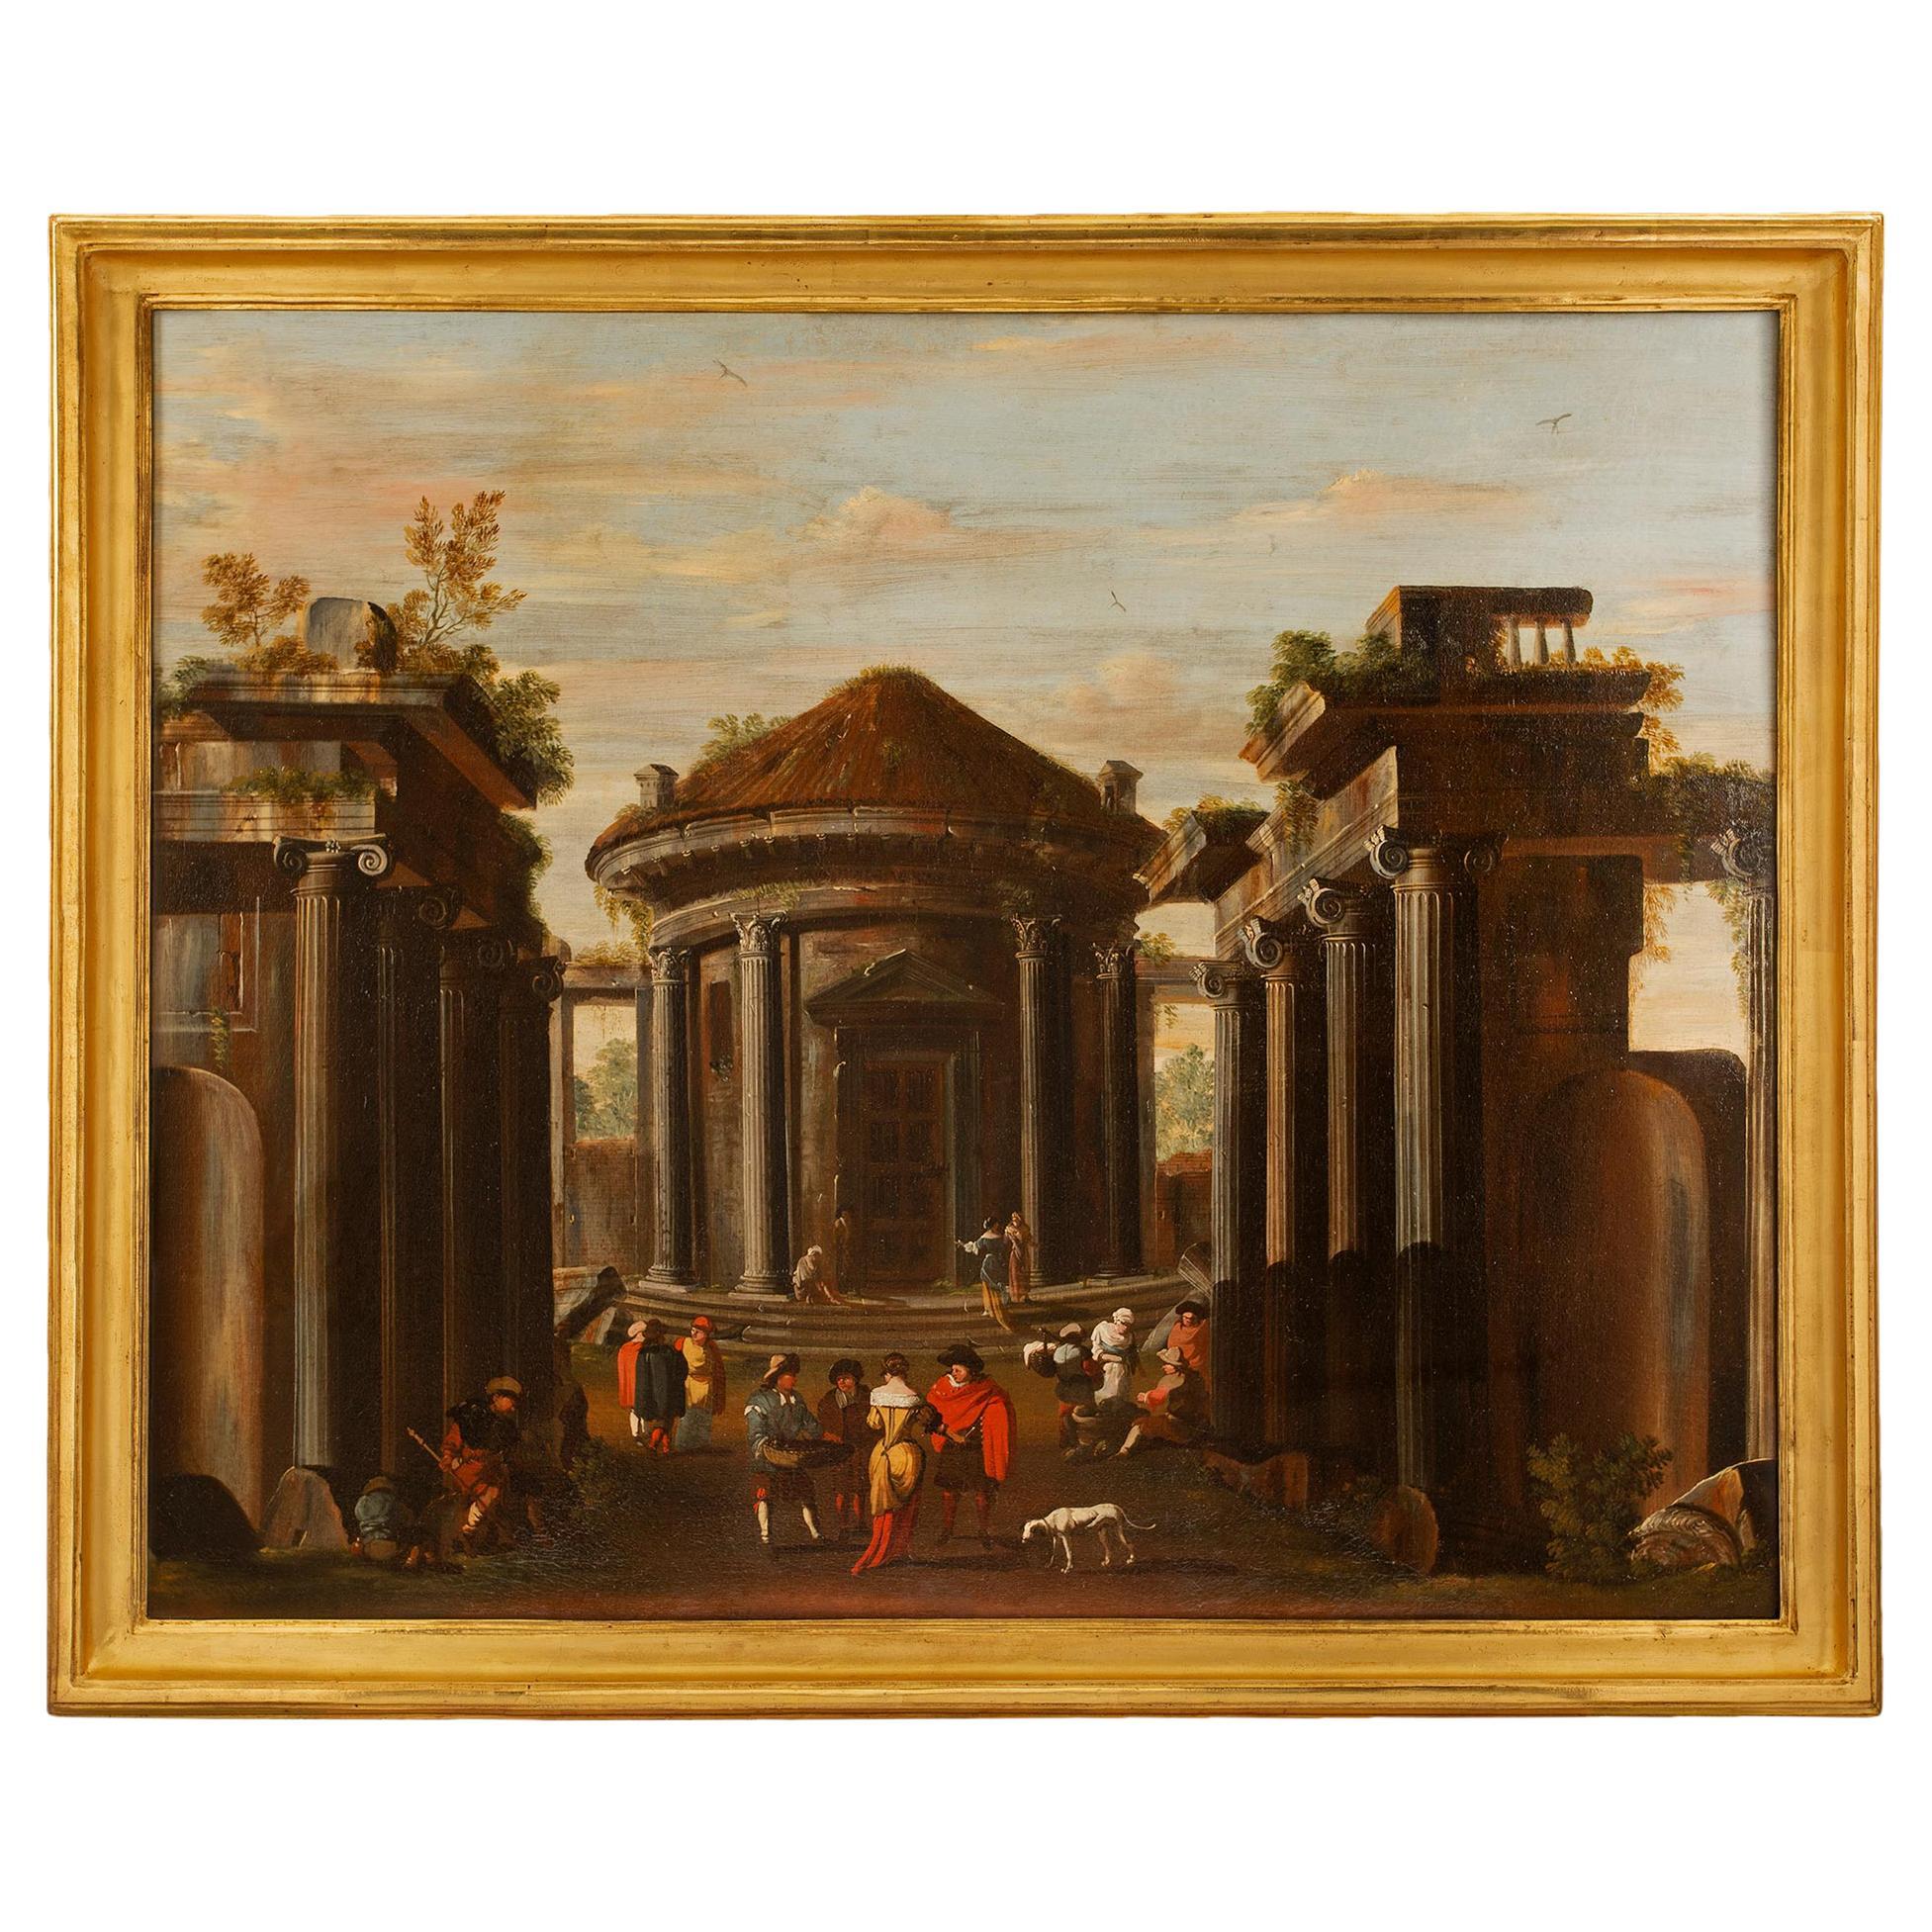 Italian Early 18th Century Roman Oil on Canvas, of an Architectural Theme